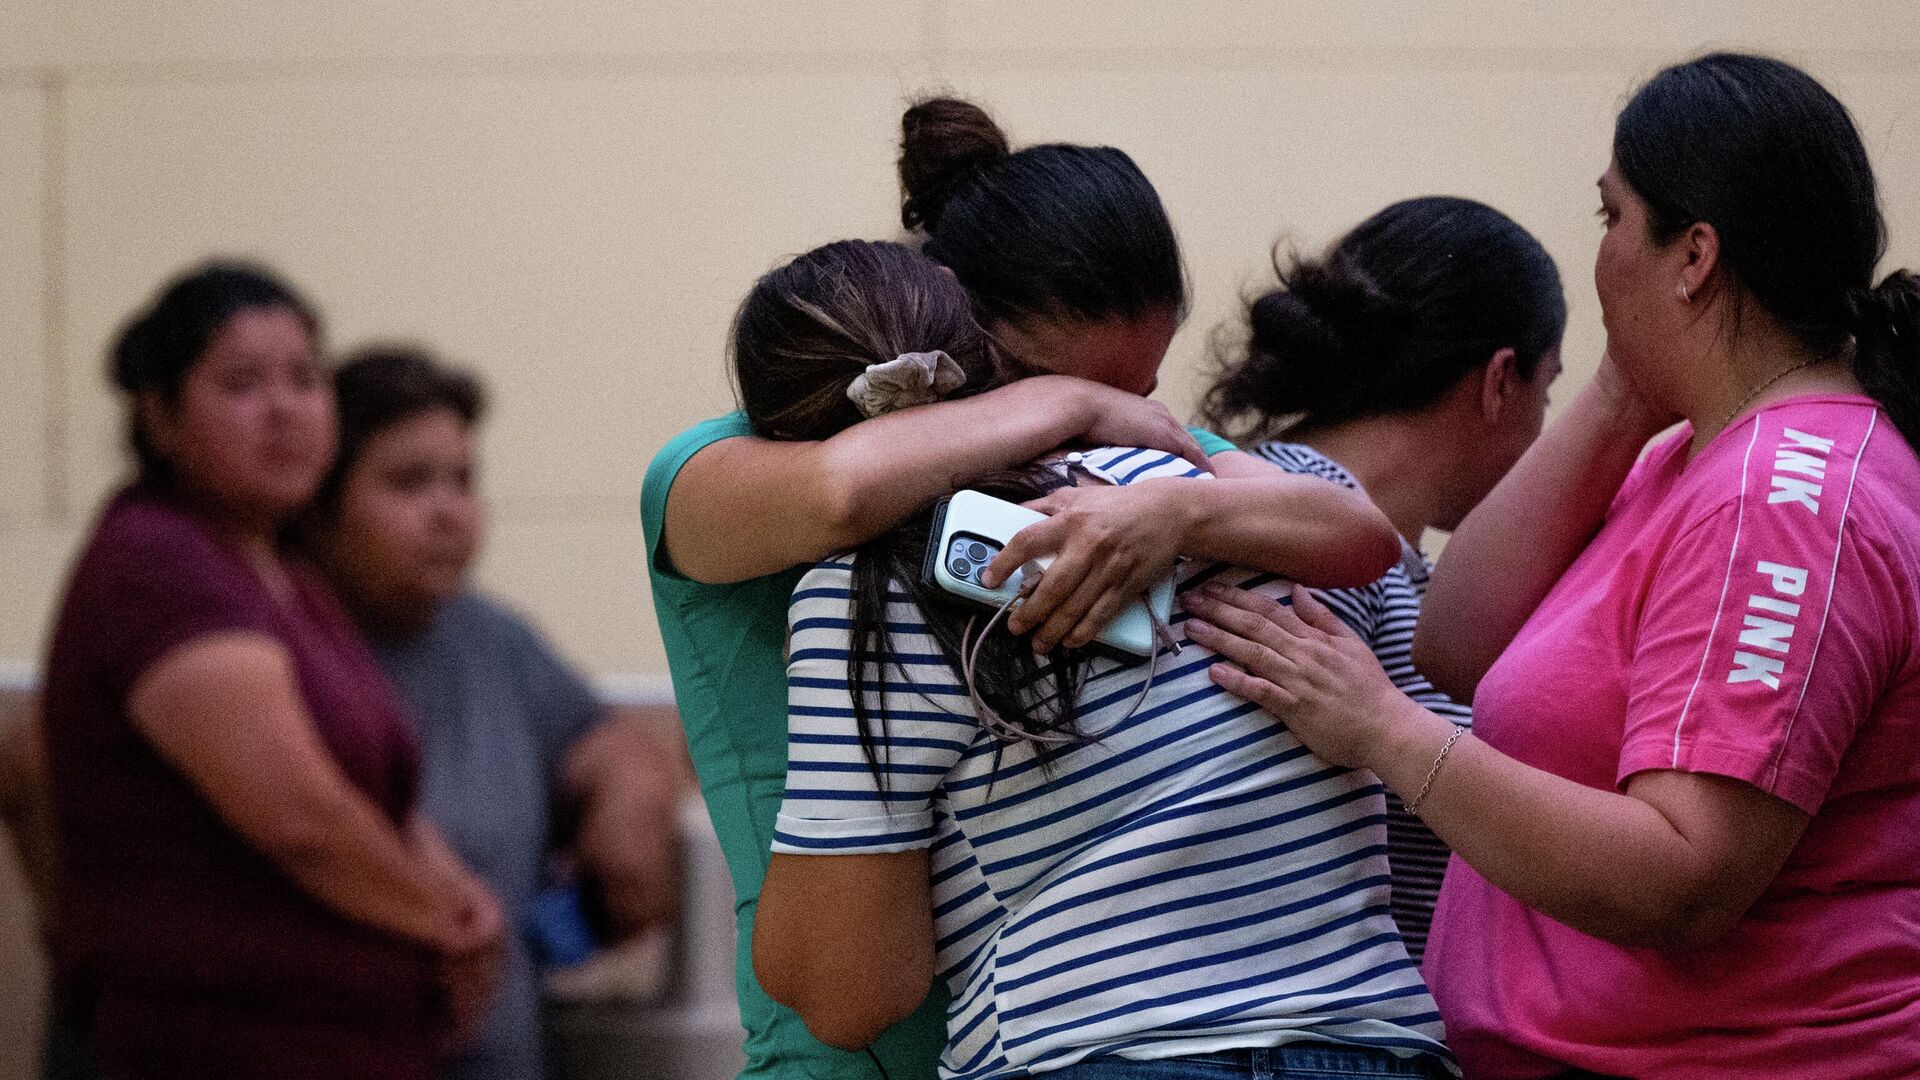 UVALDE, TEXAS - MAY 24: People mourn outside of the SSGT Willie de Leon Civic Center following the mass shooting at Robb Elementary School on May 24, 2022 in Uvalde, Texas. According to reports, 19 students and 2 adults were killed, with the gunman fatally shot by law enforcement - Sputnik International, 1920, 25.05.2022